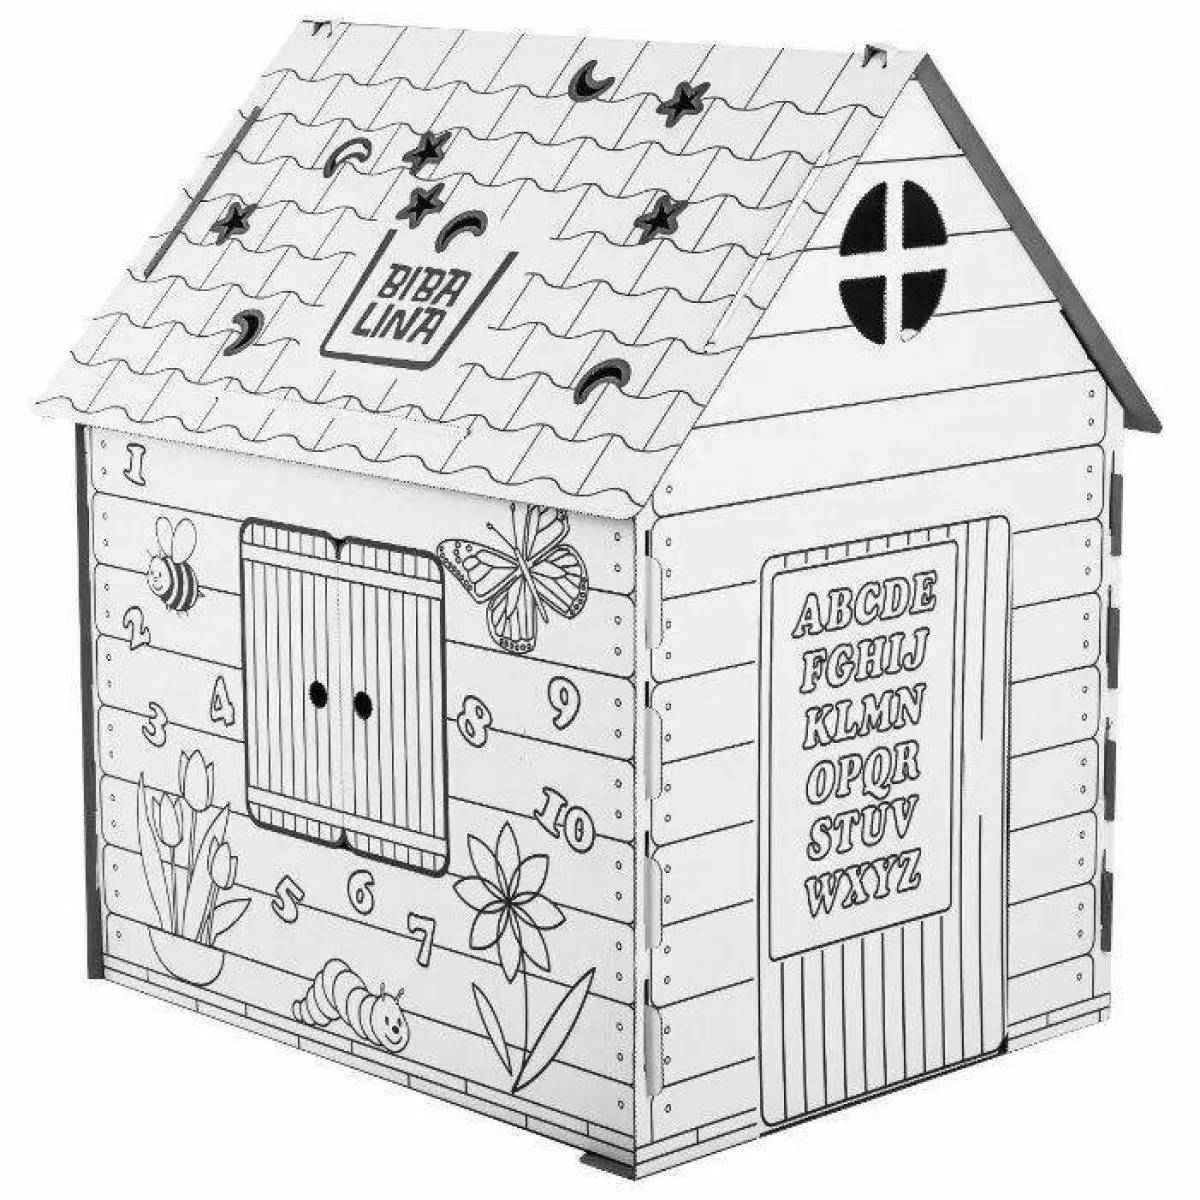 Rough Cardboard House Coloring Pages for Preschoolers